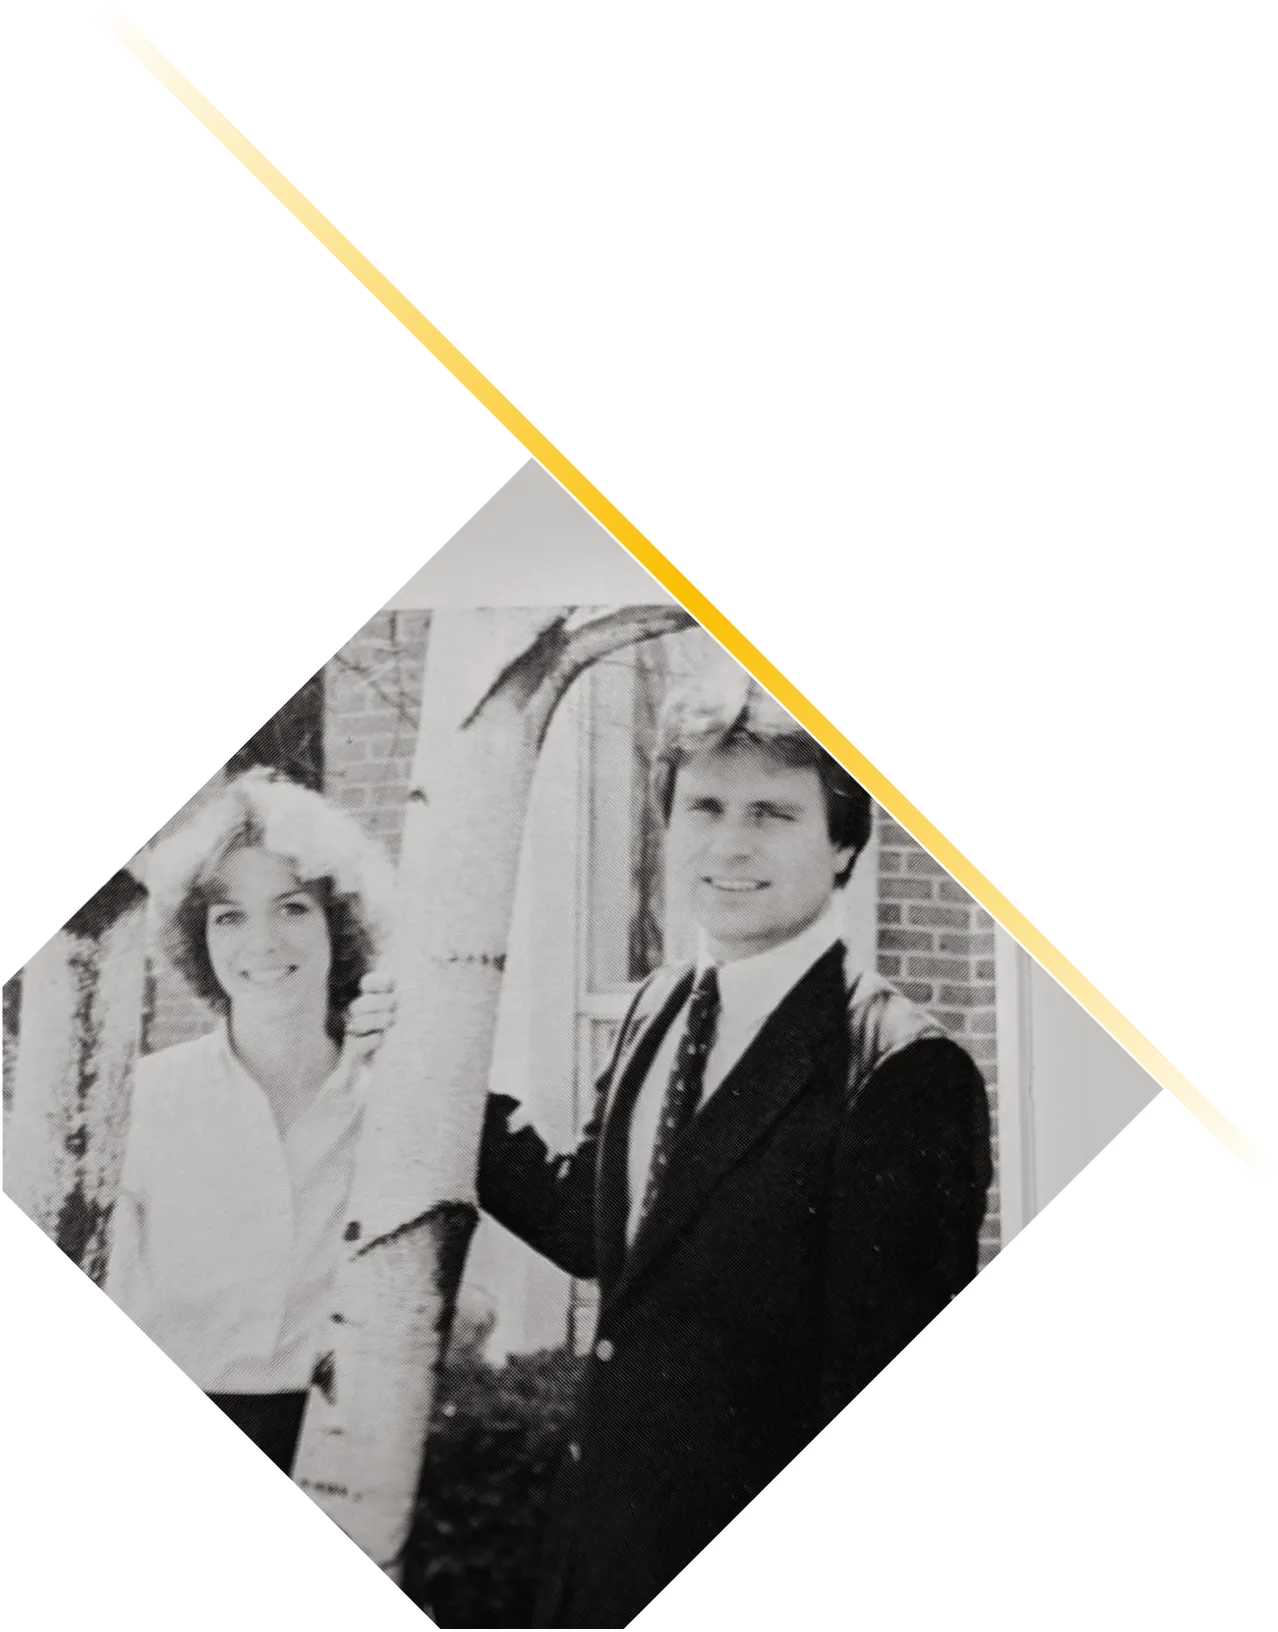 Jean and Paul Adams began their careers at Wilkes in the office of residence life, in 1980 and 1979, respectively.